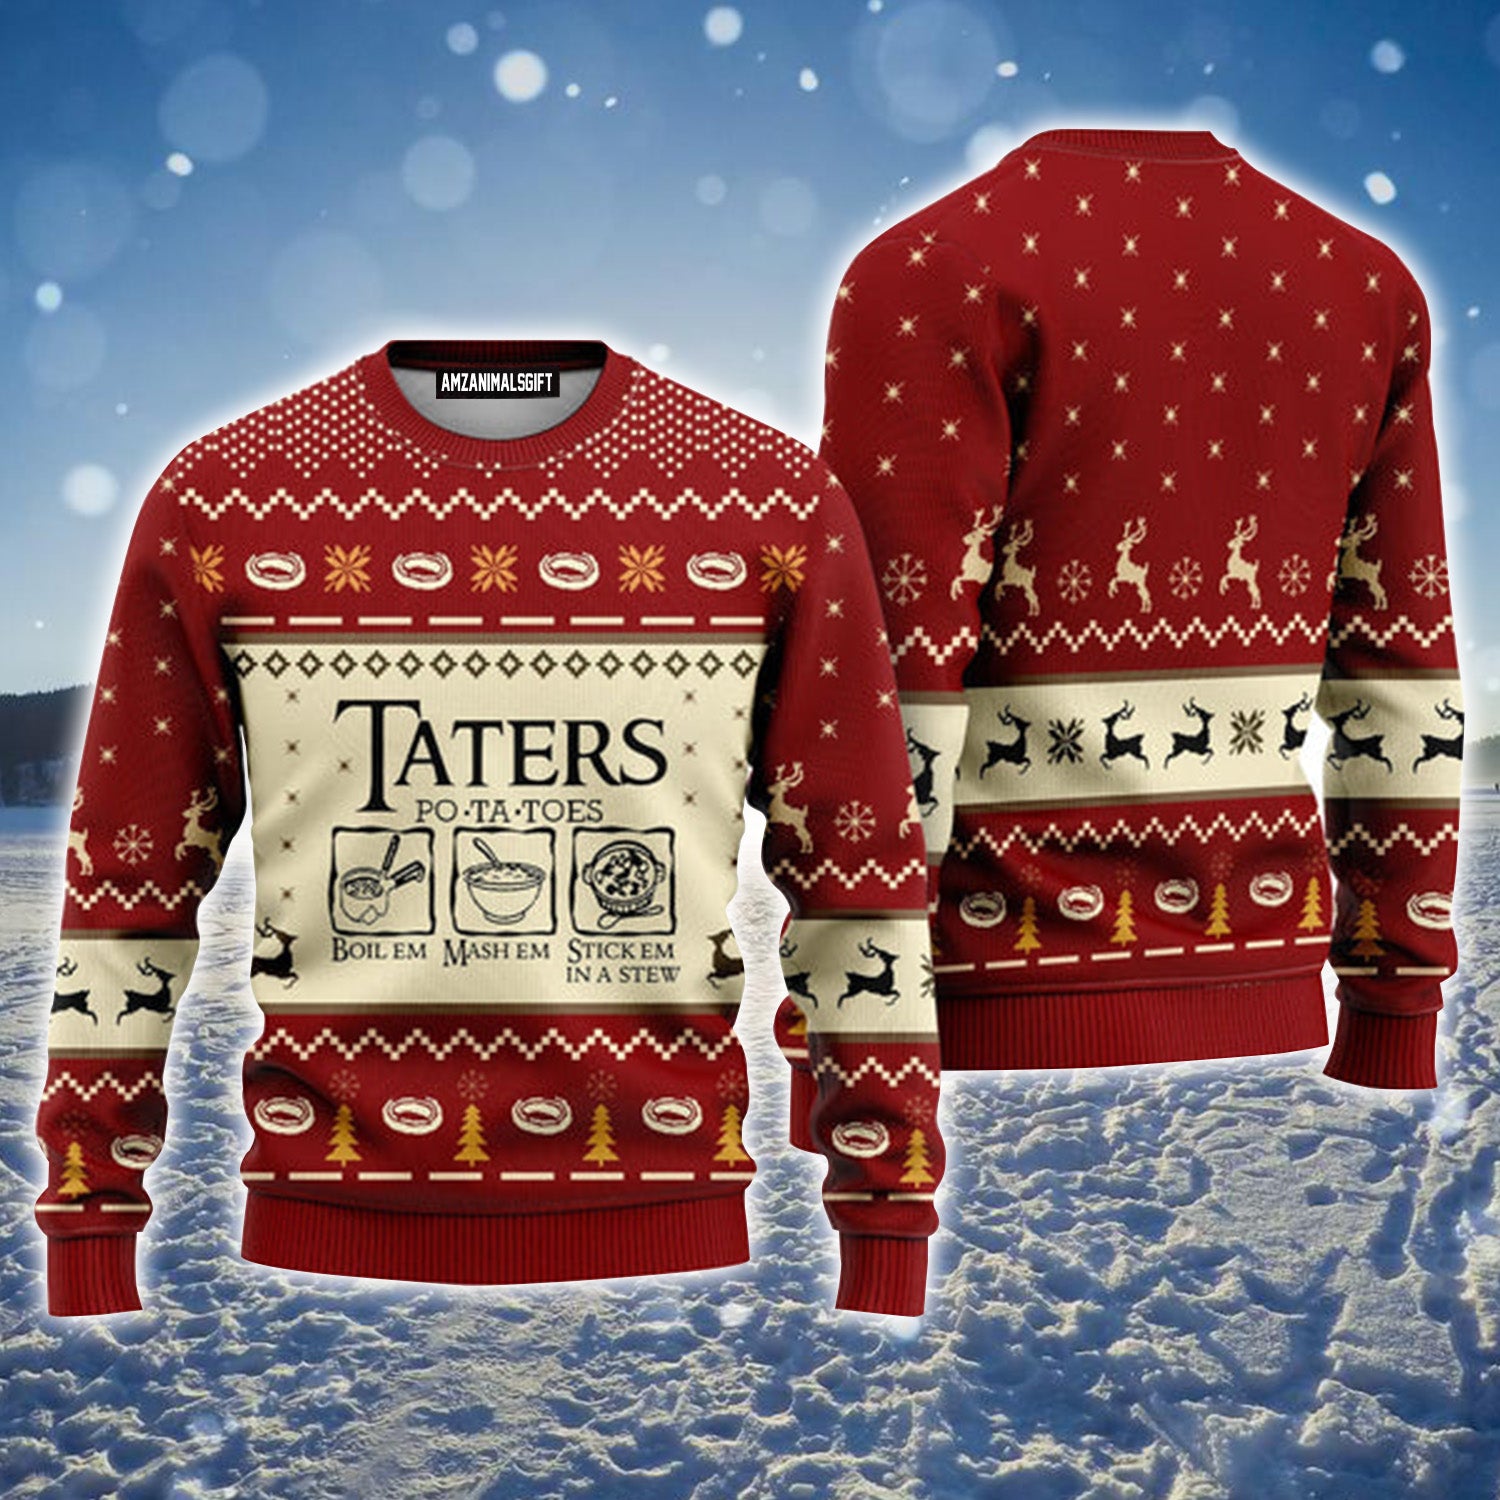 LOTR Christmas Potatoes Taters Red Urly Christmas Sweater, Christmas Sweater For Men & Women - Perfect Gift For Christmas, Family, Friends